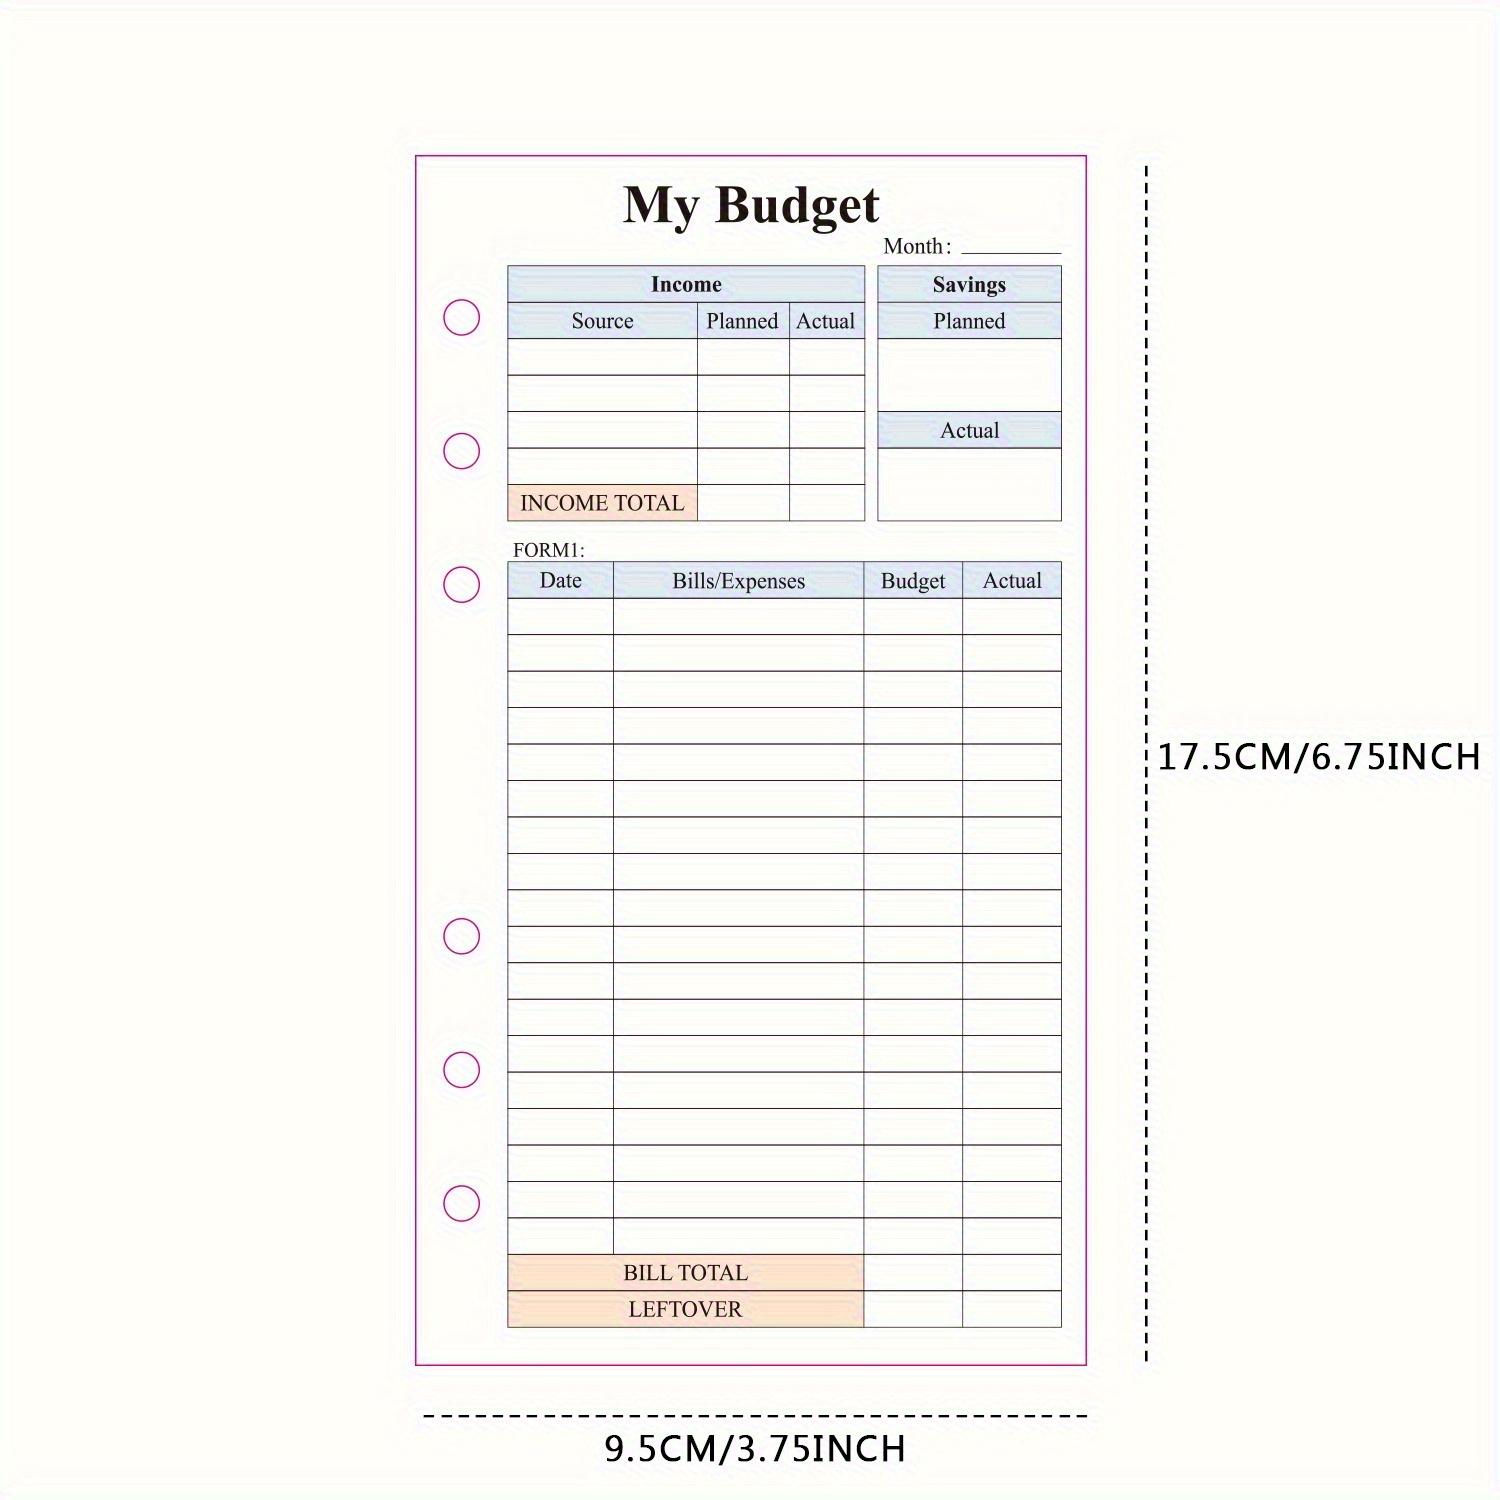  2024 Weekly & Monthly Planner Refill, 3-3/4 x 6-3/4, January  2024 - Dec 2024, Personal/Compact/Size 3 : Office Products